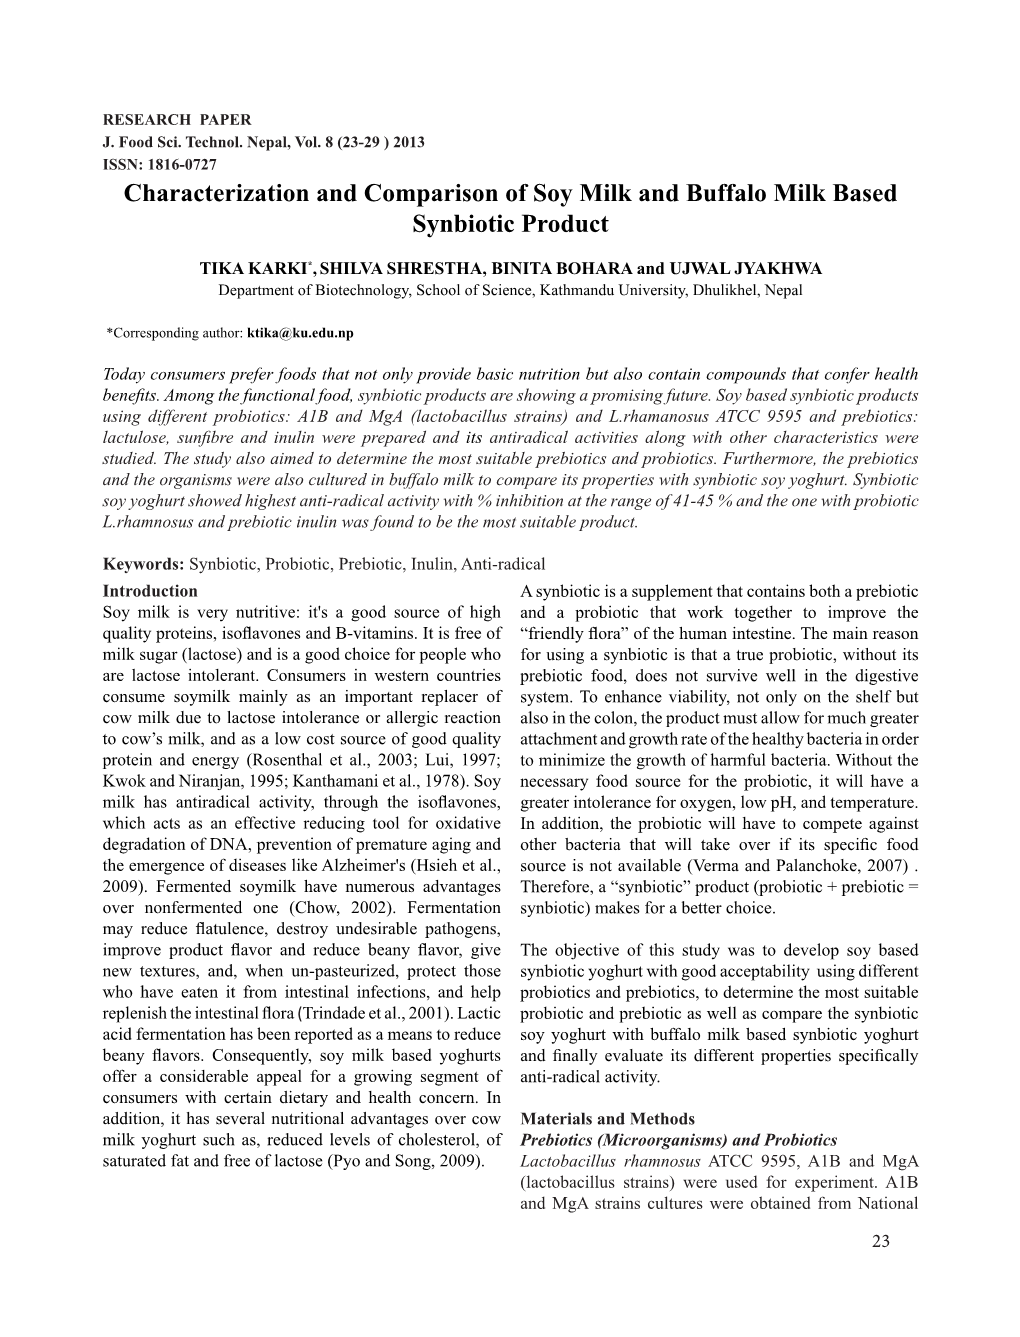 Characterization and Comparison of Soy Milk and Buffalo Milk Based Synbiotic Product